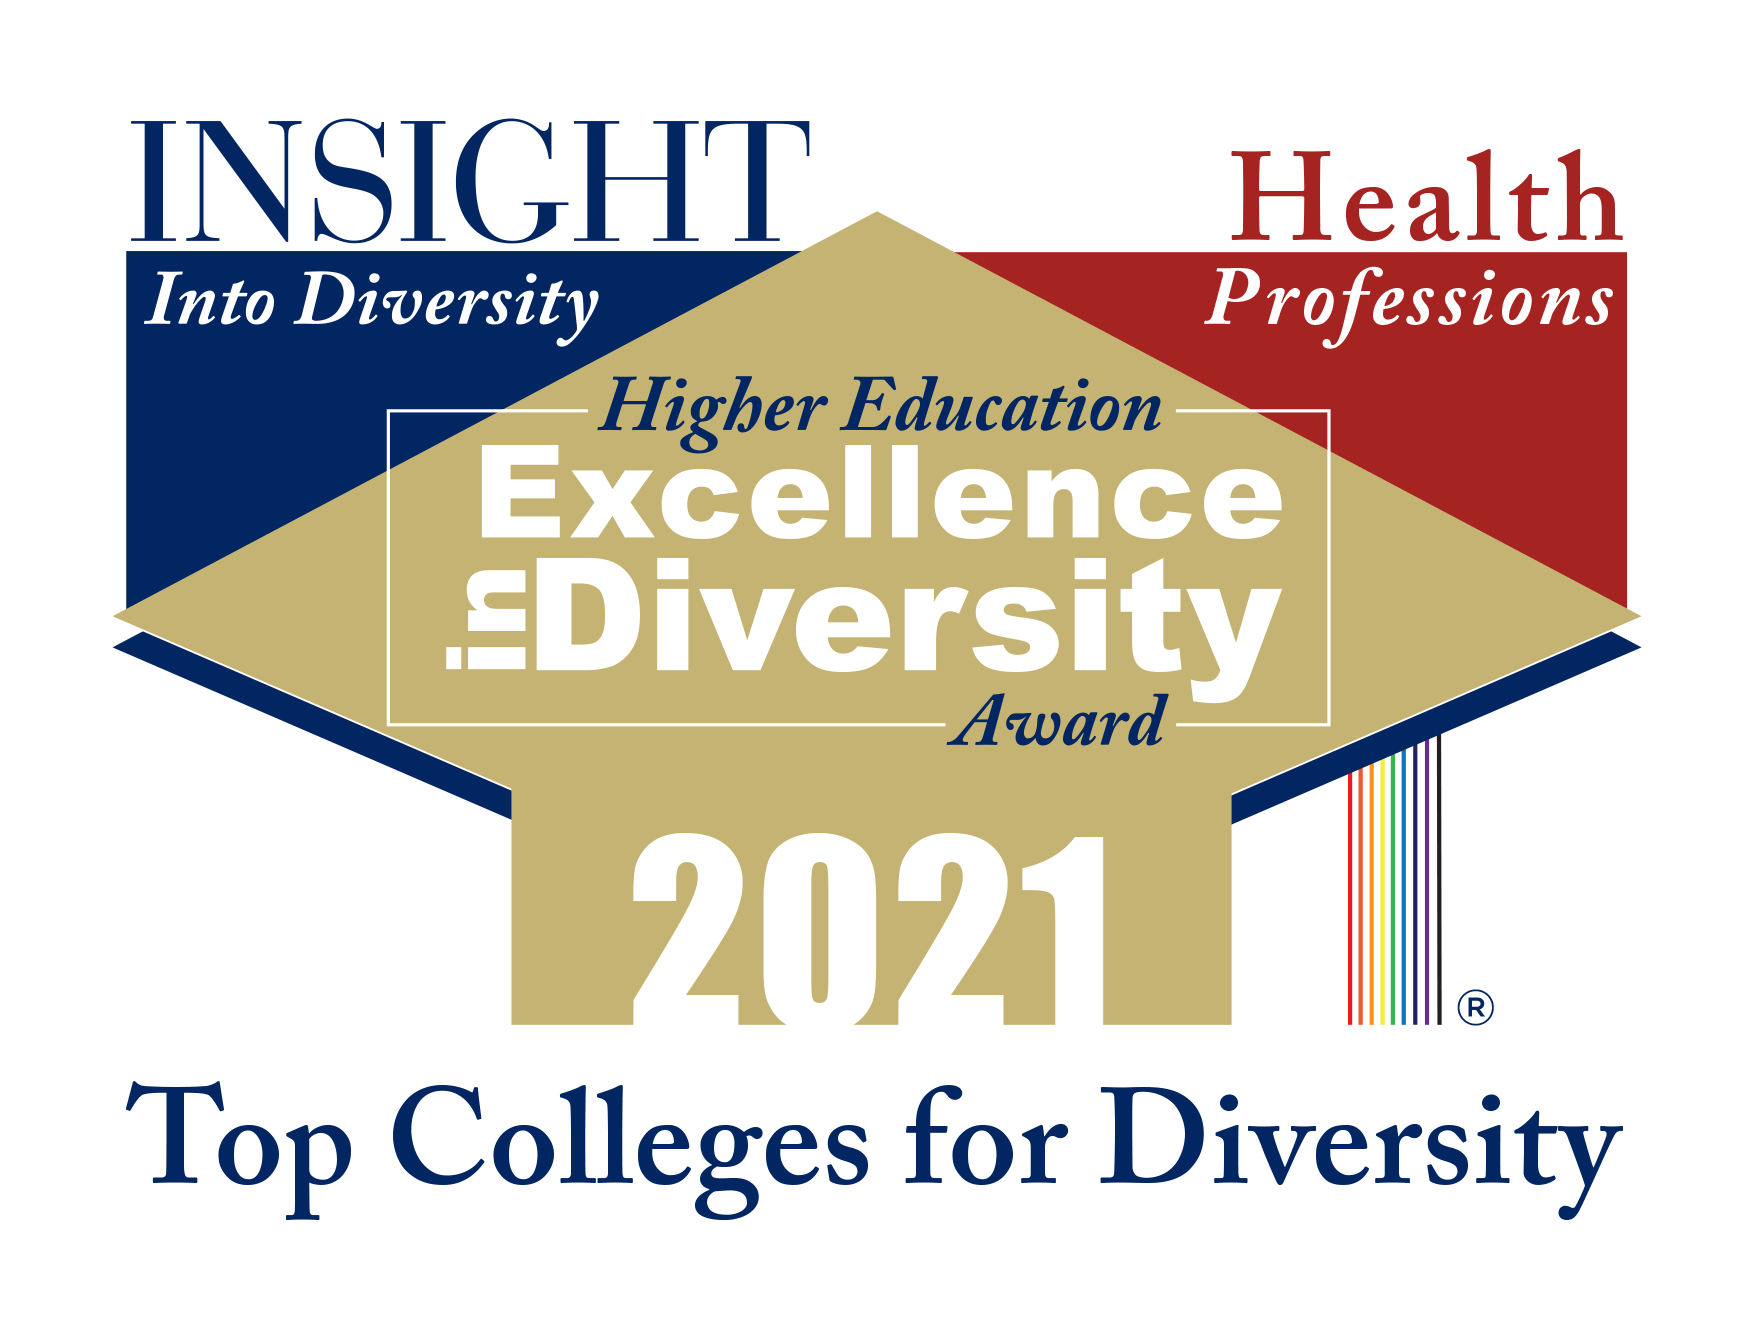 Higher Education Excellence in Diversity Award 2021